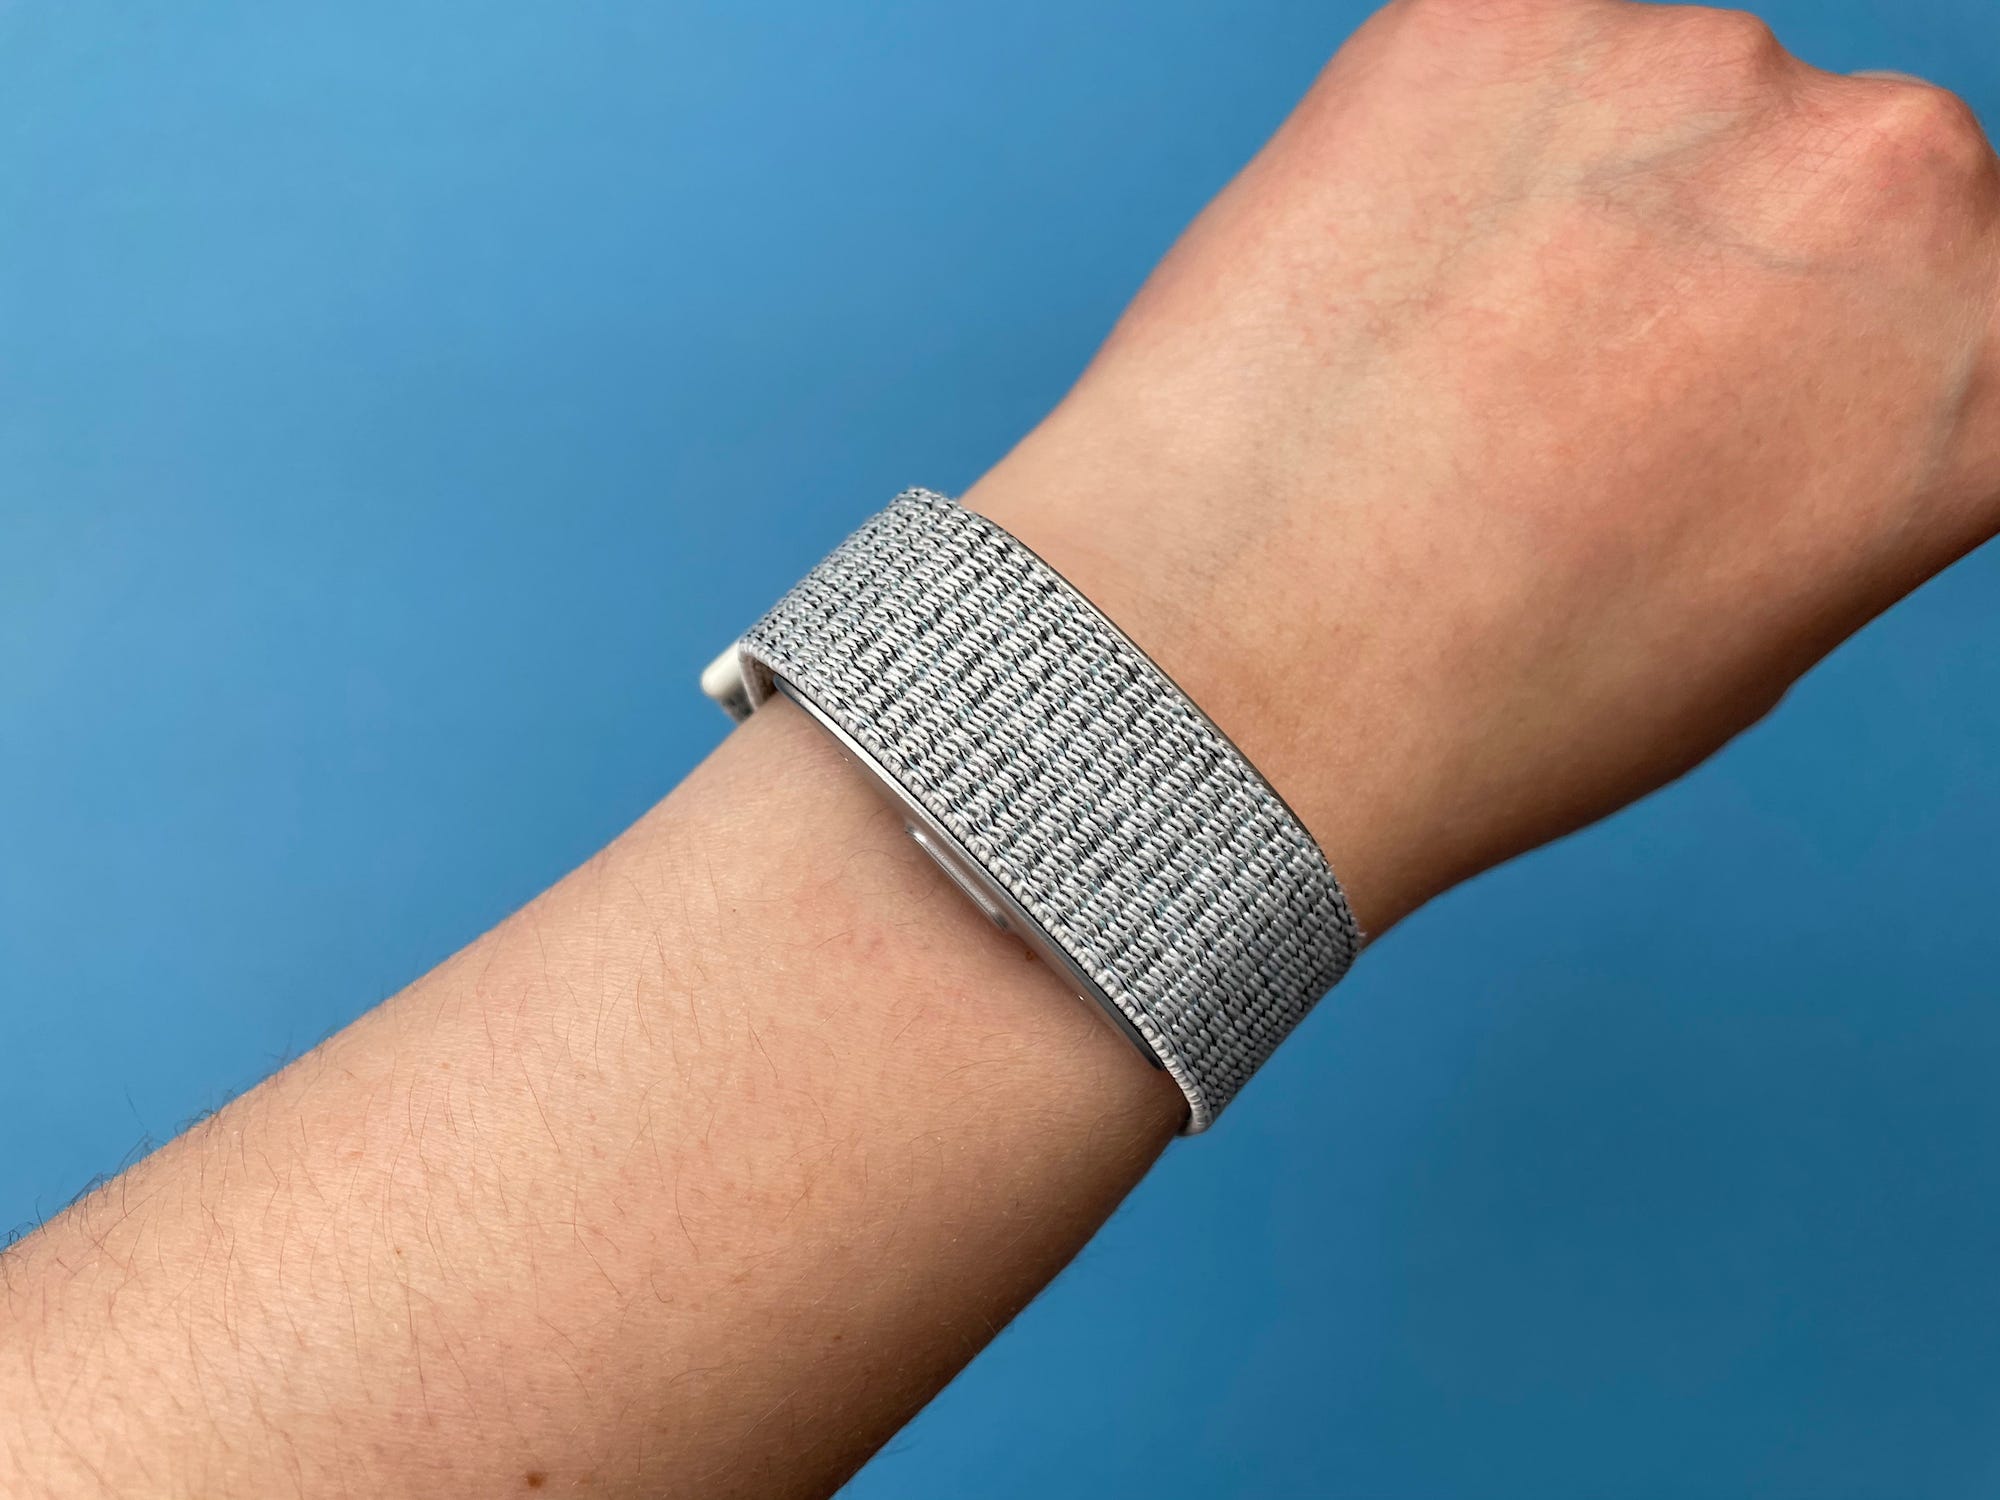 The Amazon Halo band in silver being worn on someone's wrist